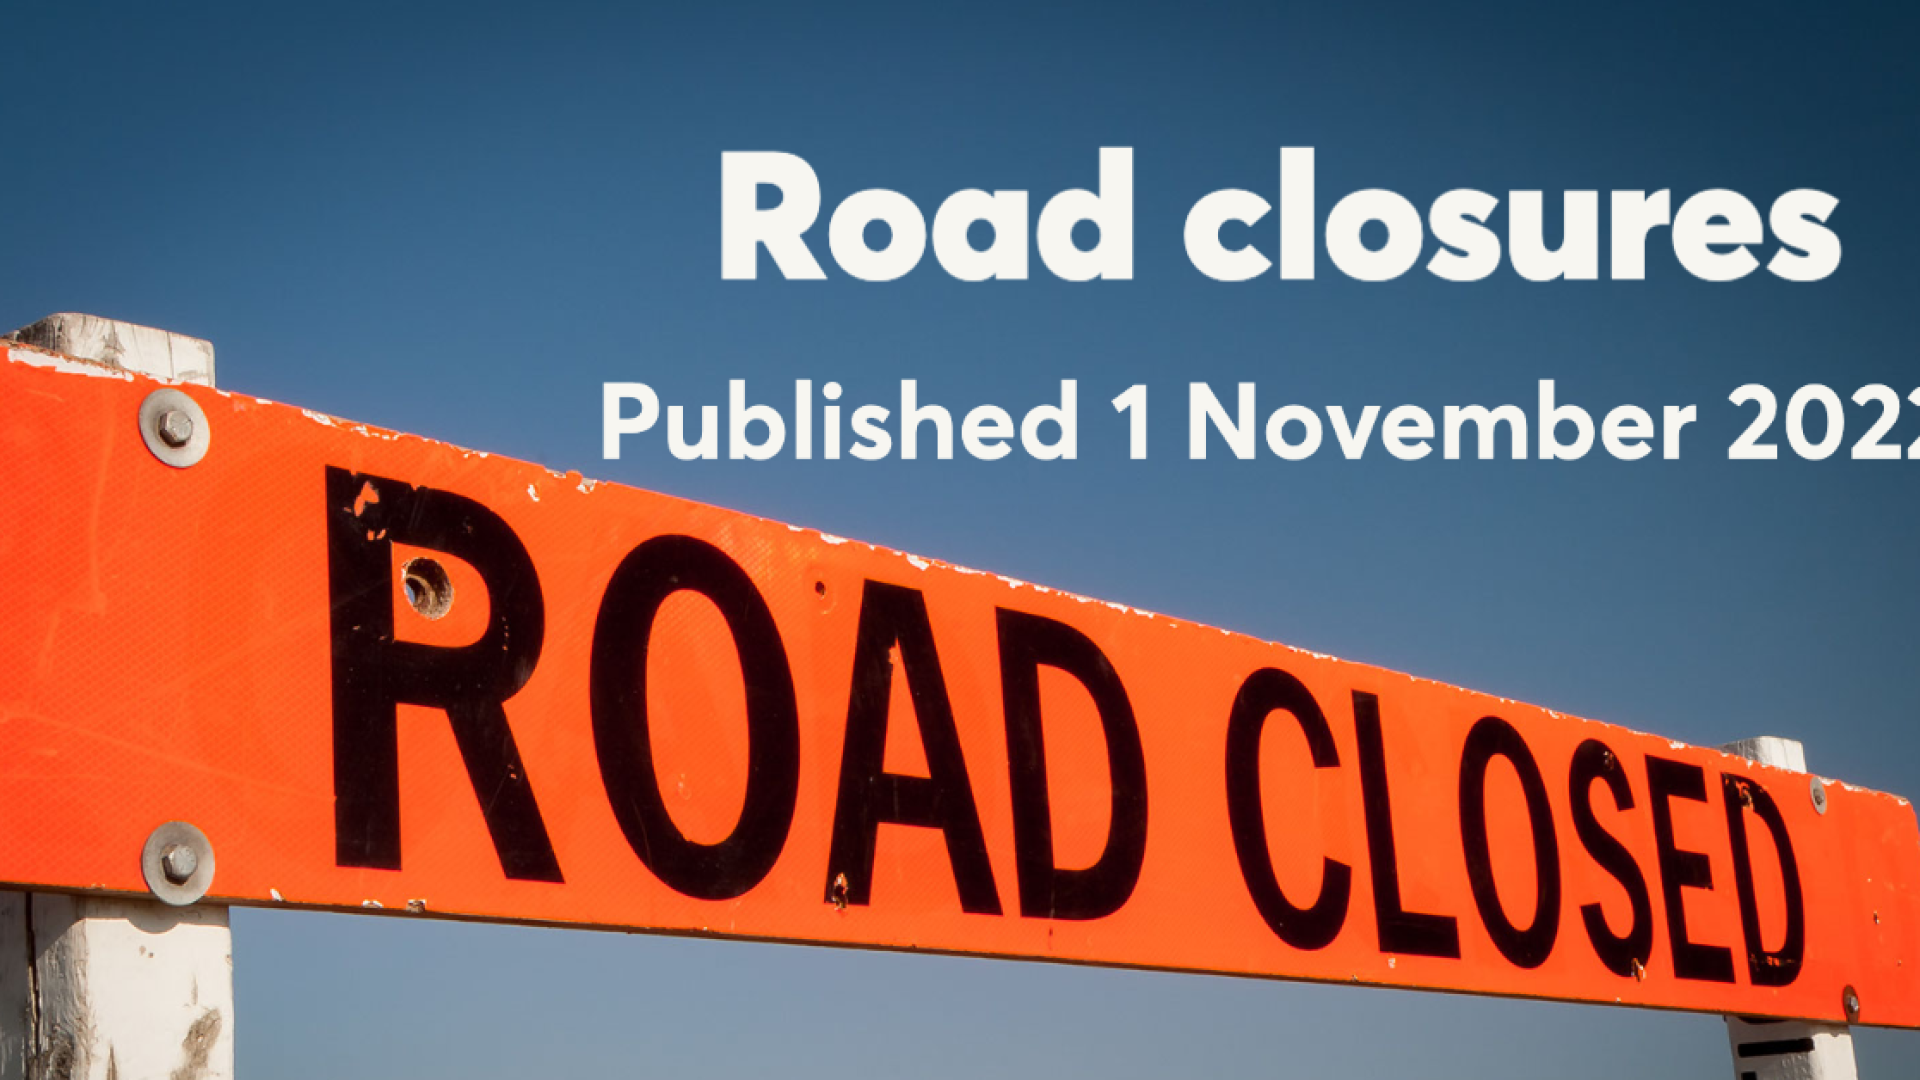 upcoming-road-closures-published-1-november-2022-our-nelson